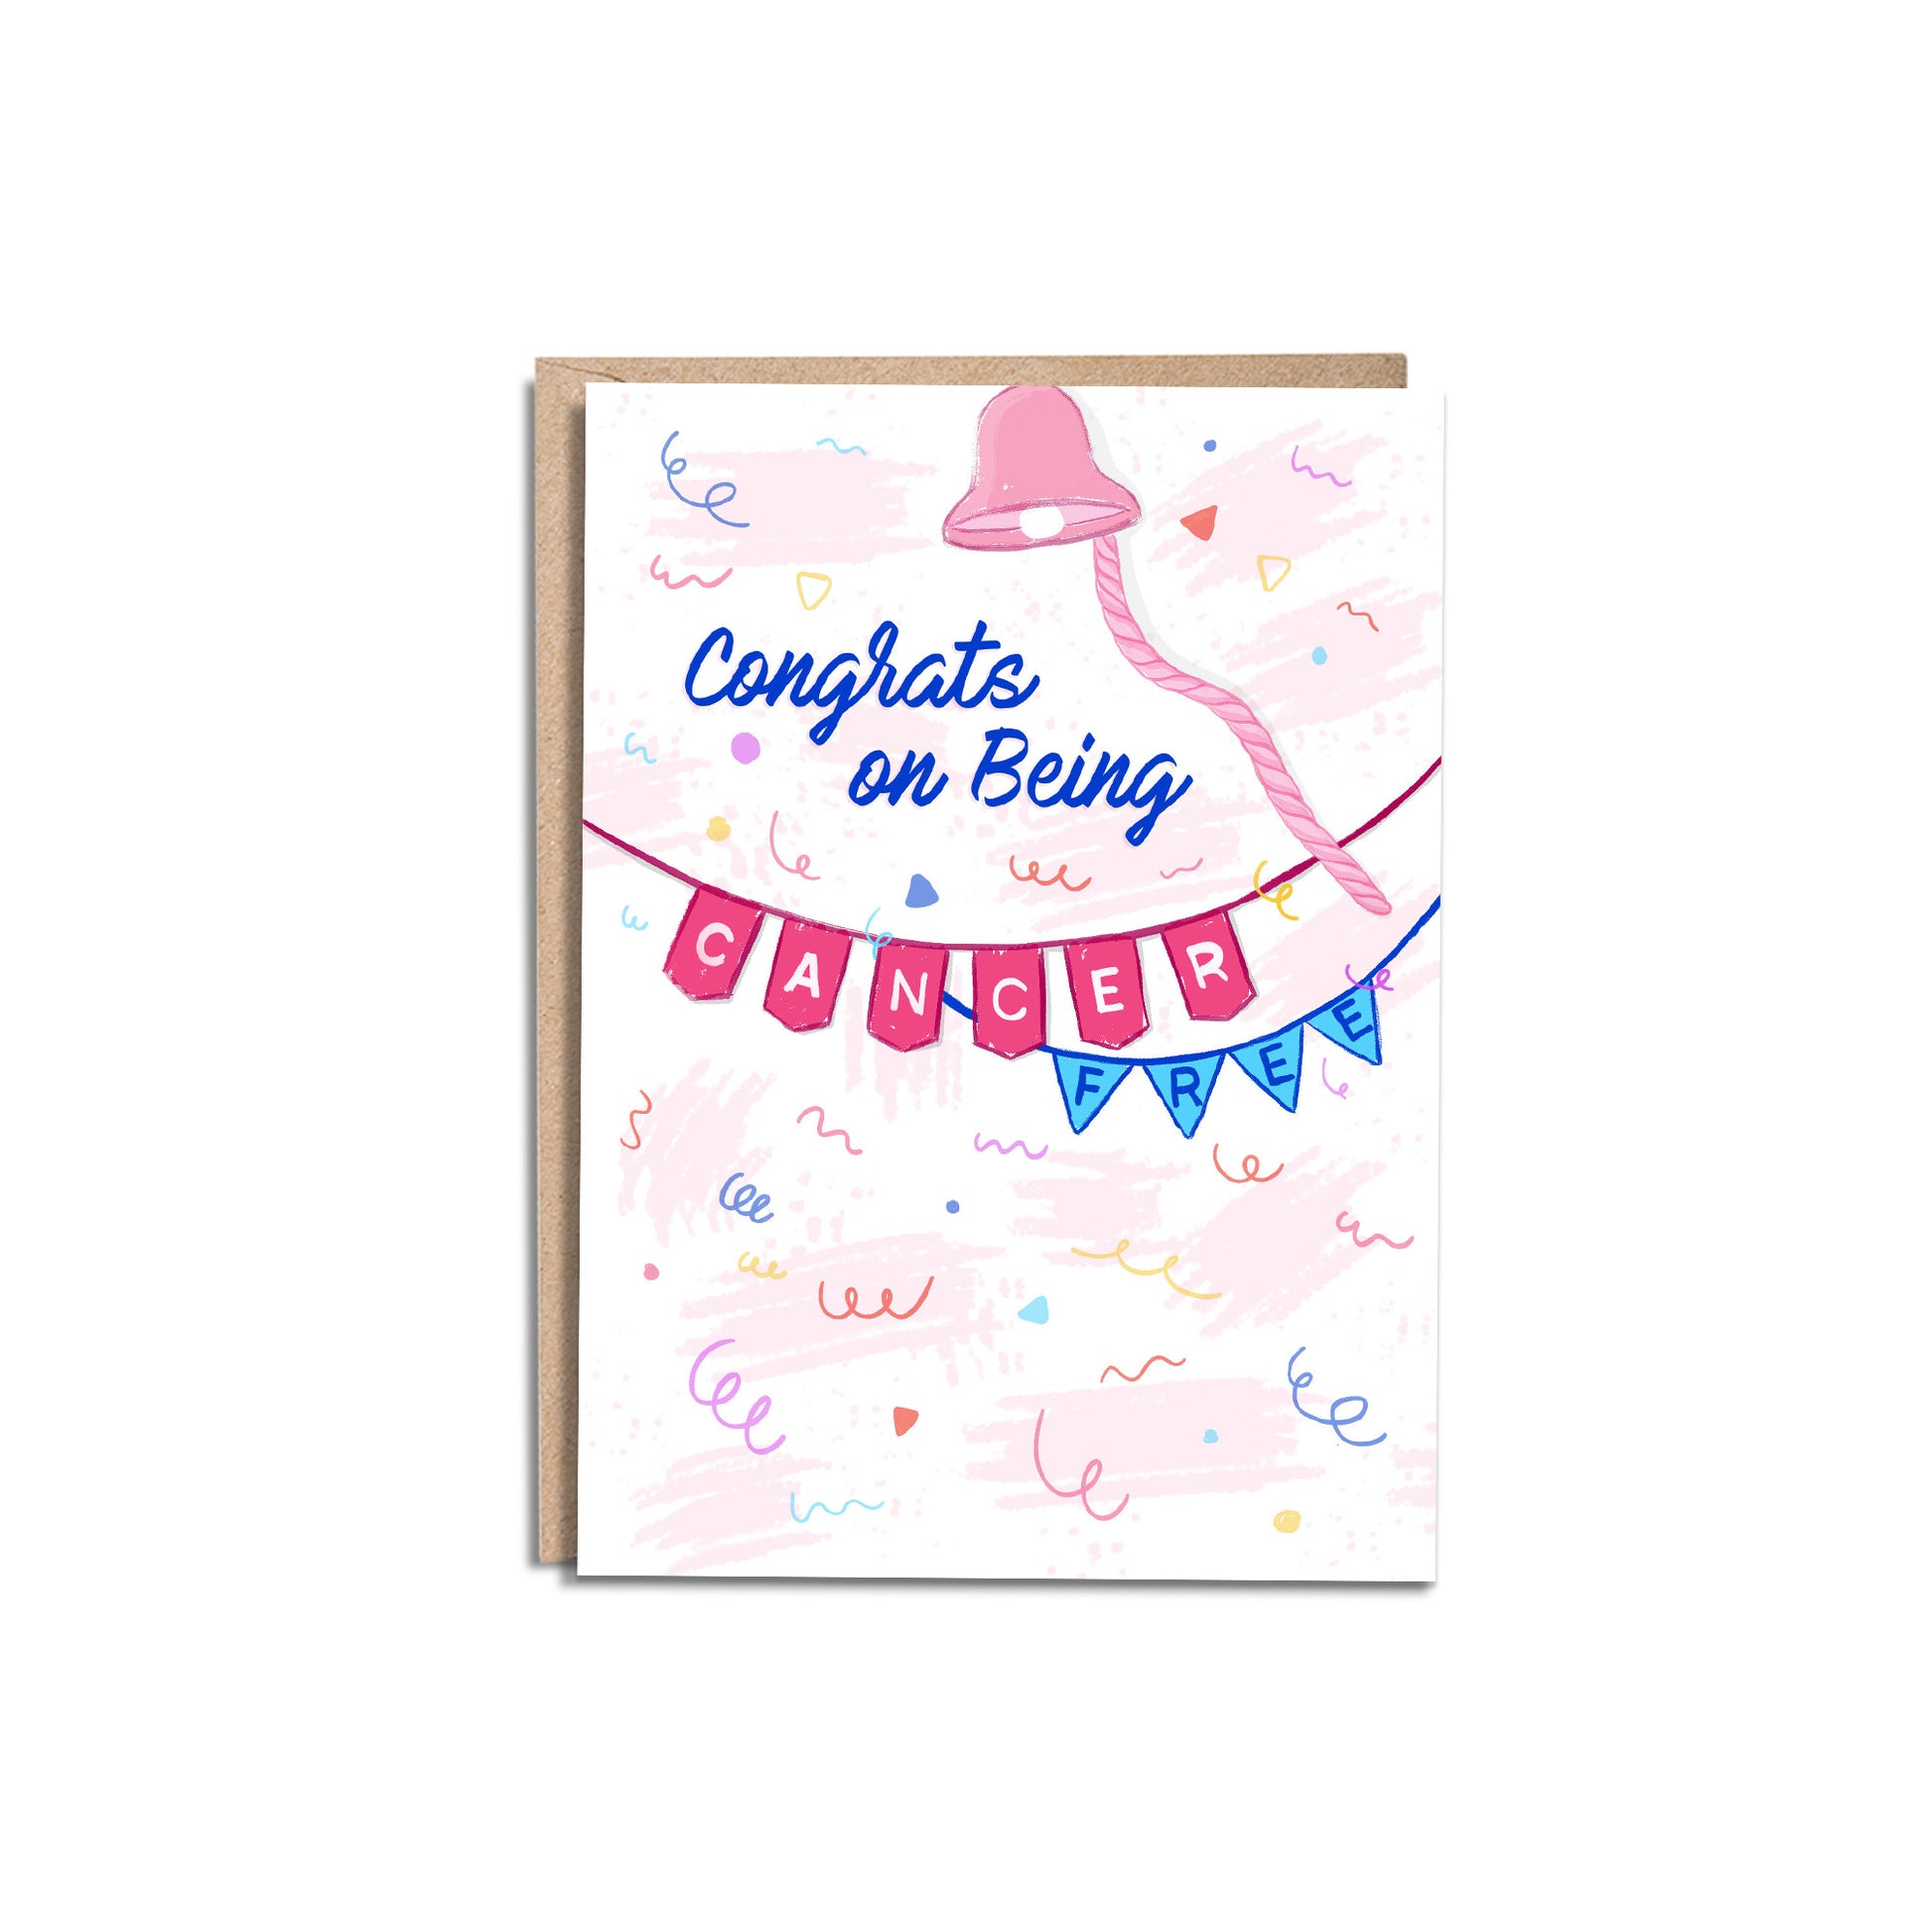 Congrats! You’re Cancer Free 5x7” greeting card from Goods Made By Digitrillnana, Ashley Fletcher. Black Woman Owned. Cancer greeting card. Perfect card for a cancer survivor, beat cancer, cancer remission. Encouragement cards for cancer patients.